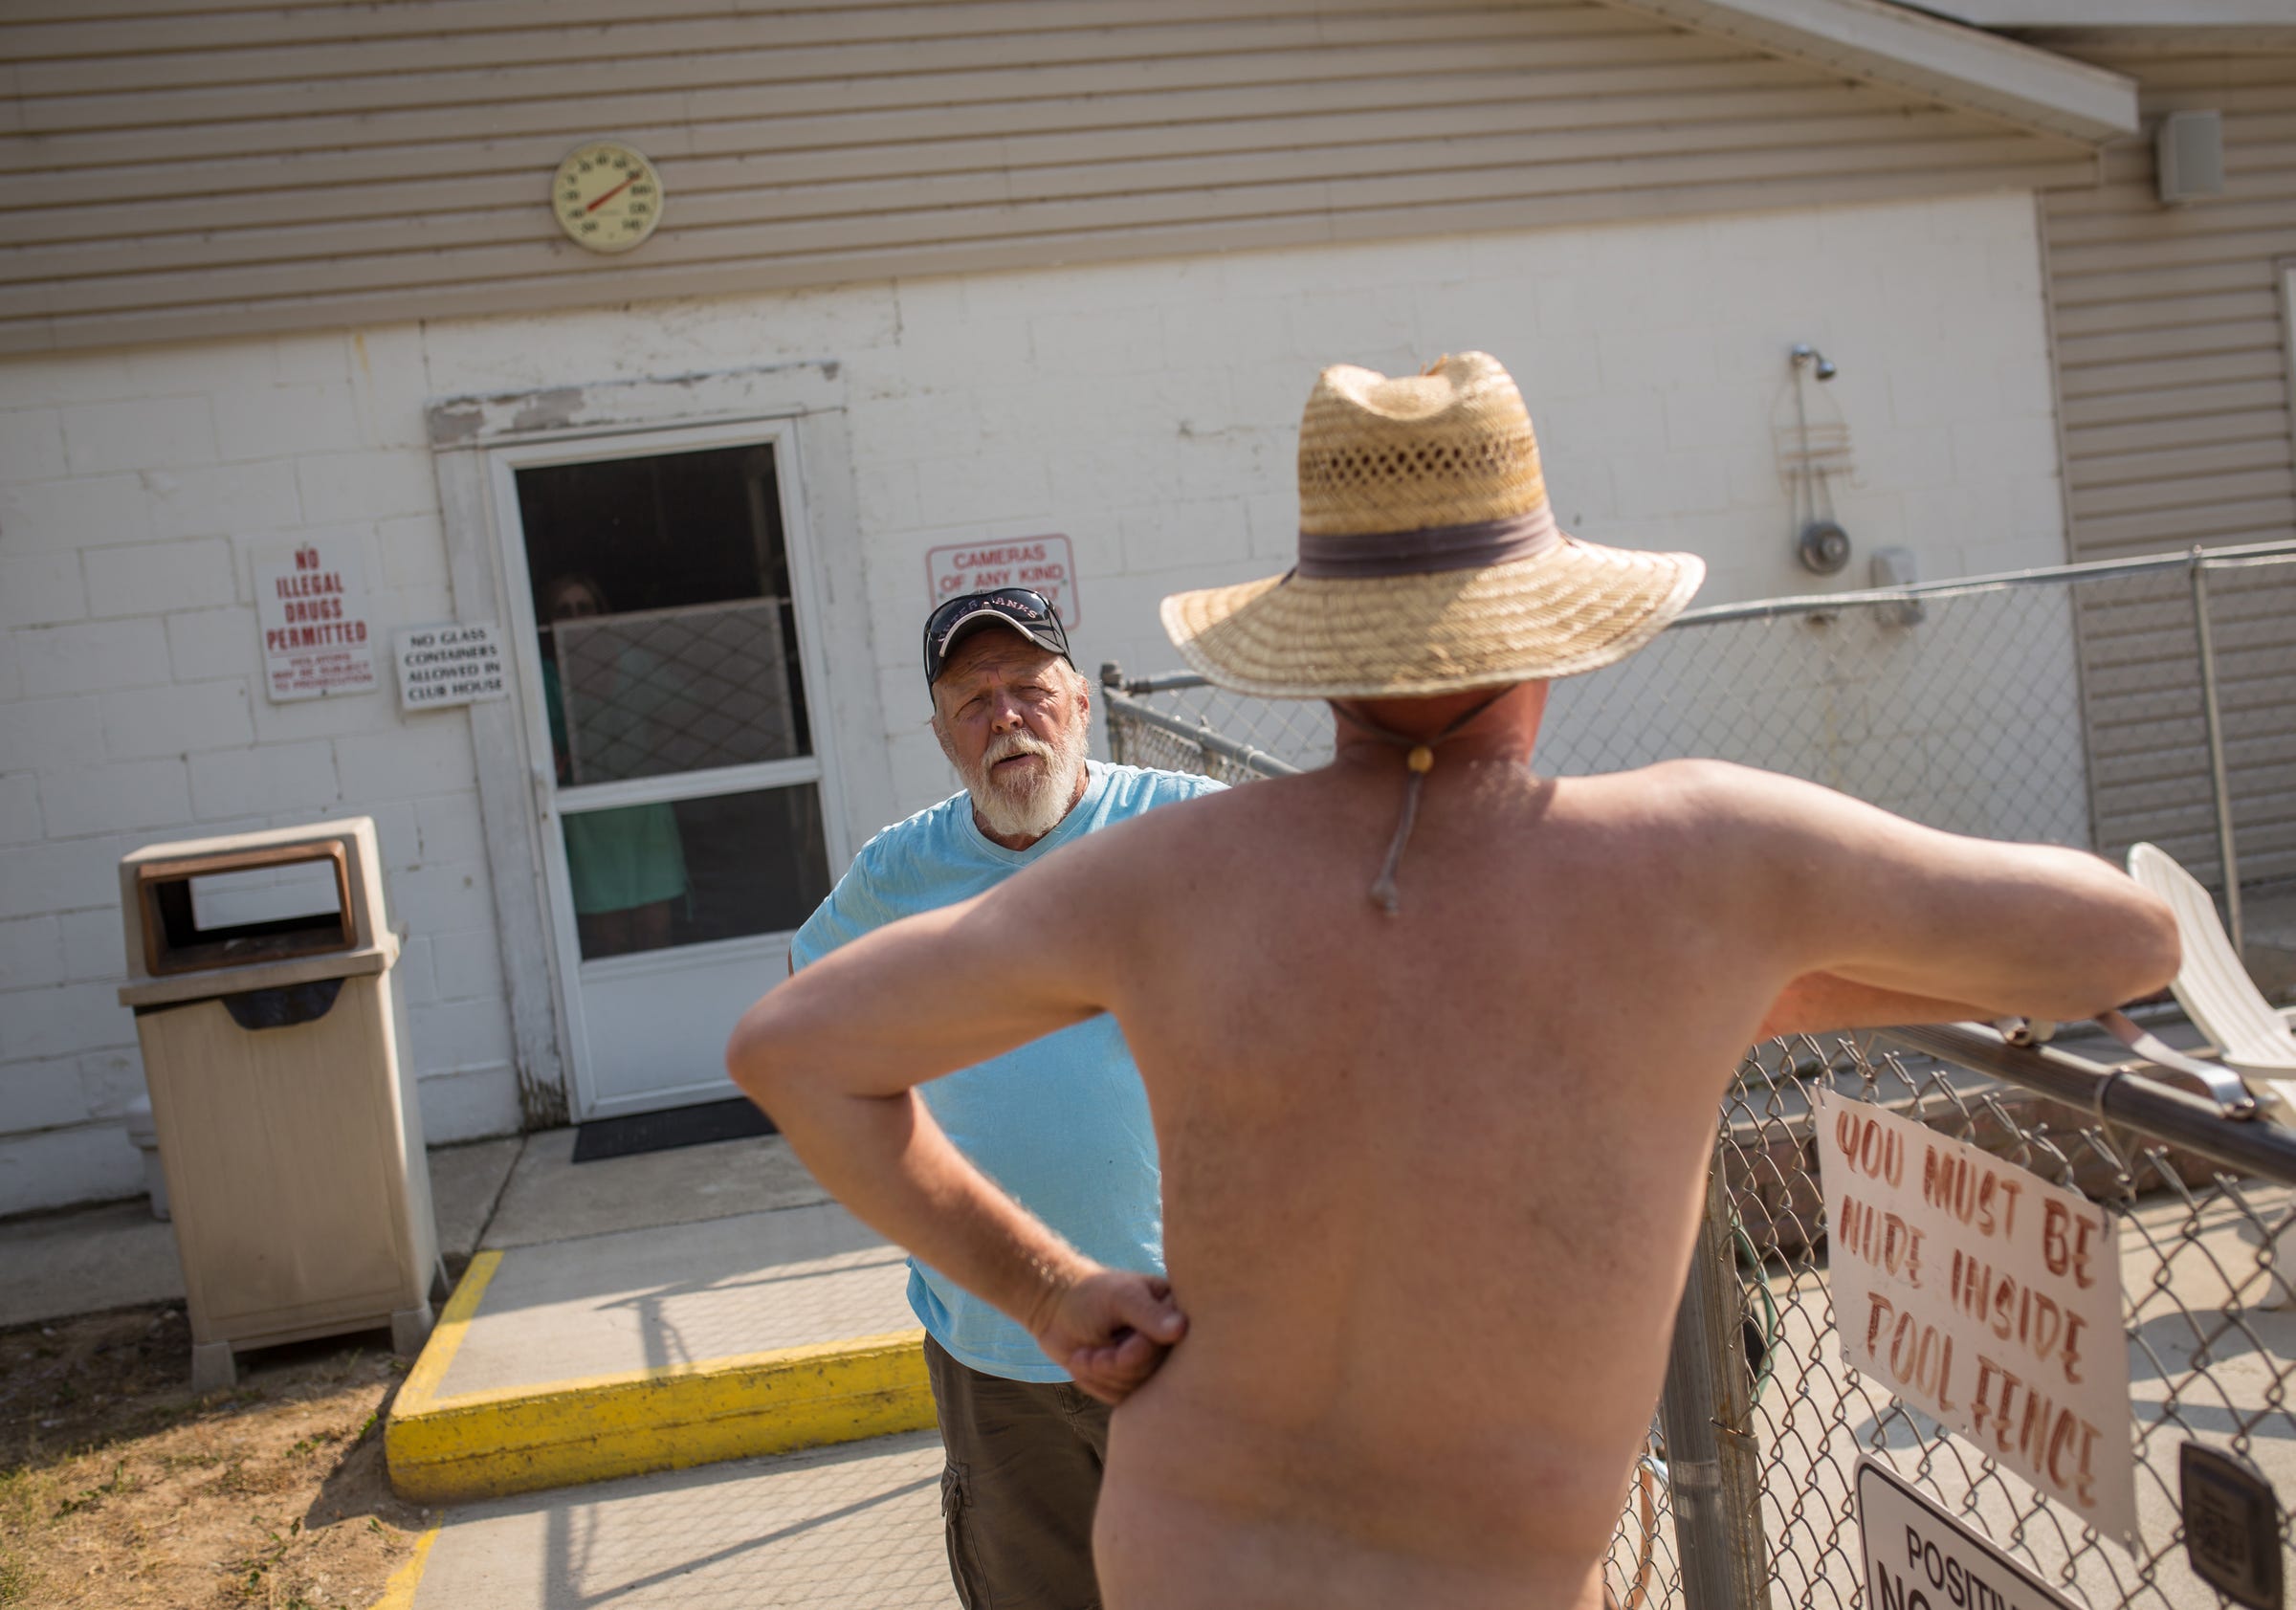 At this Michigan campground, nudity is just a way of life